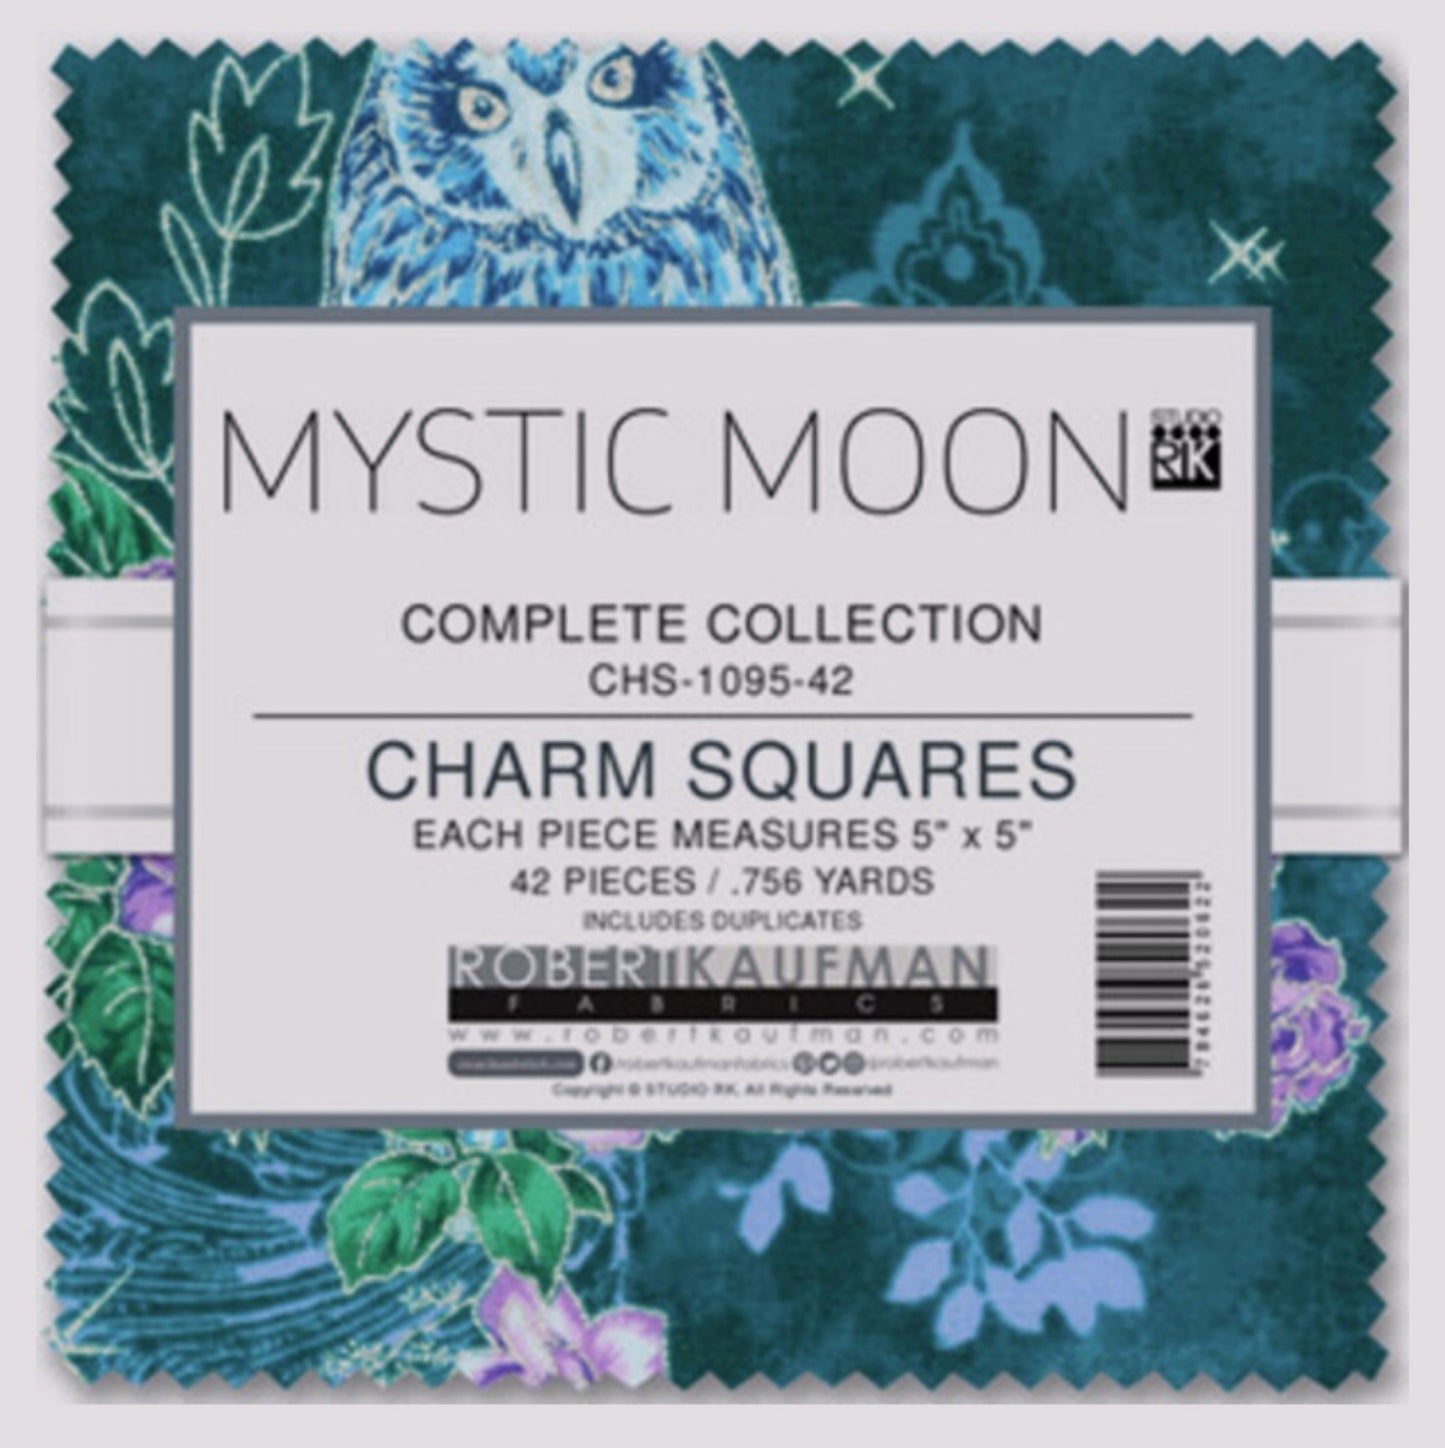 Mystic Moon Charm Pack Robert Kaufman - 5" x 5" 42 pc Charm pack - contains the complete Mystic Moon Collection